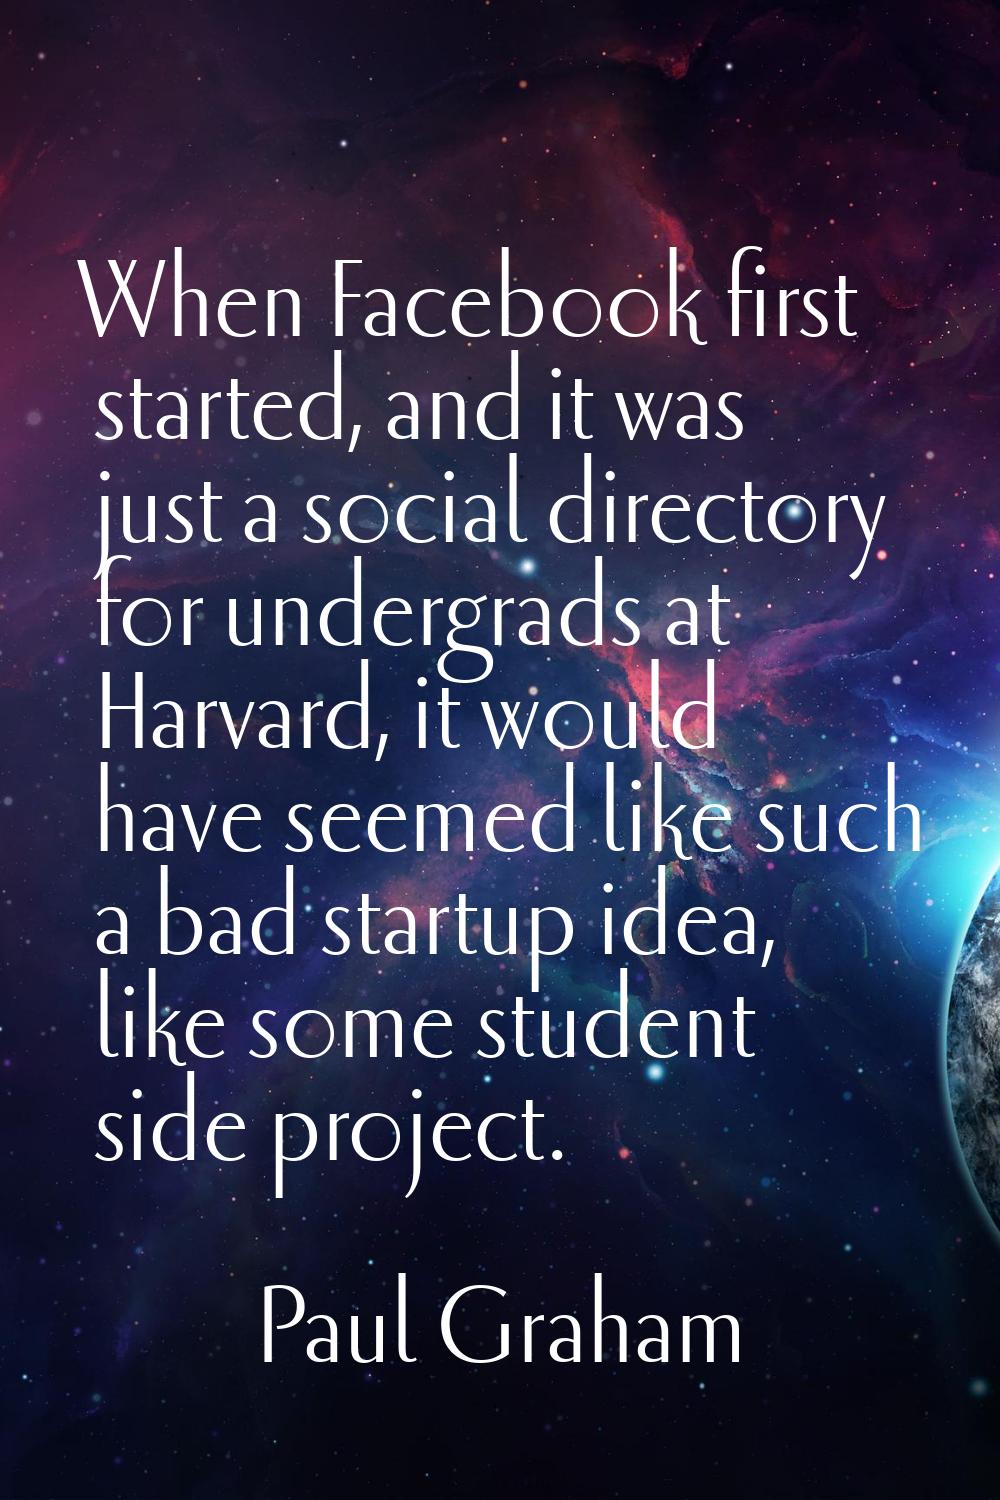 When Facebook first started, and it was just a social directory for undergrads at Harvard, it would